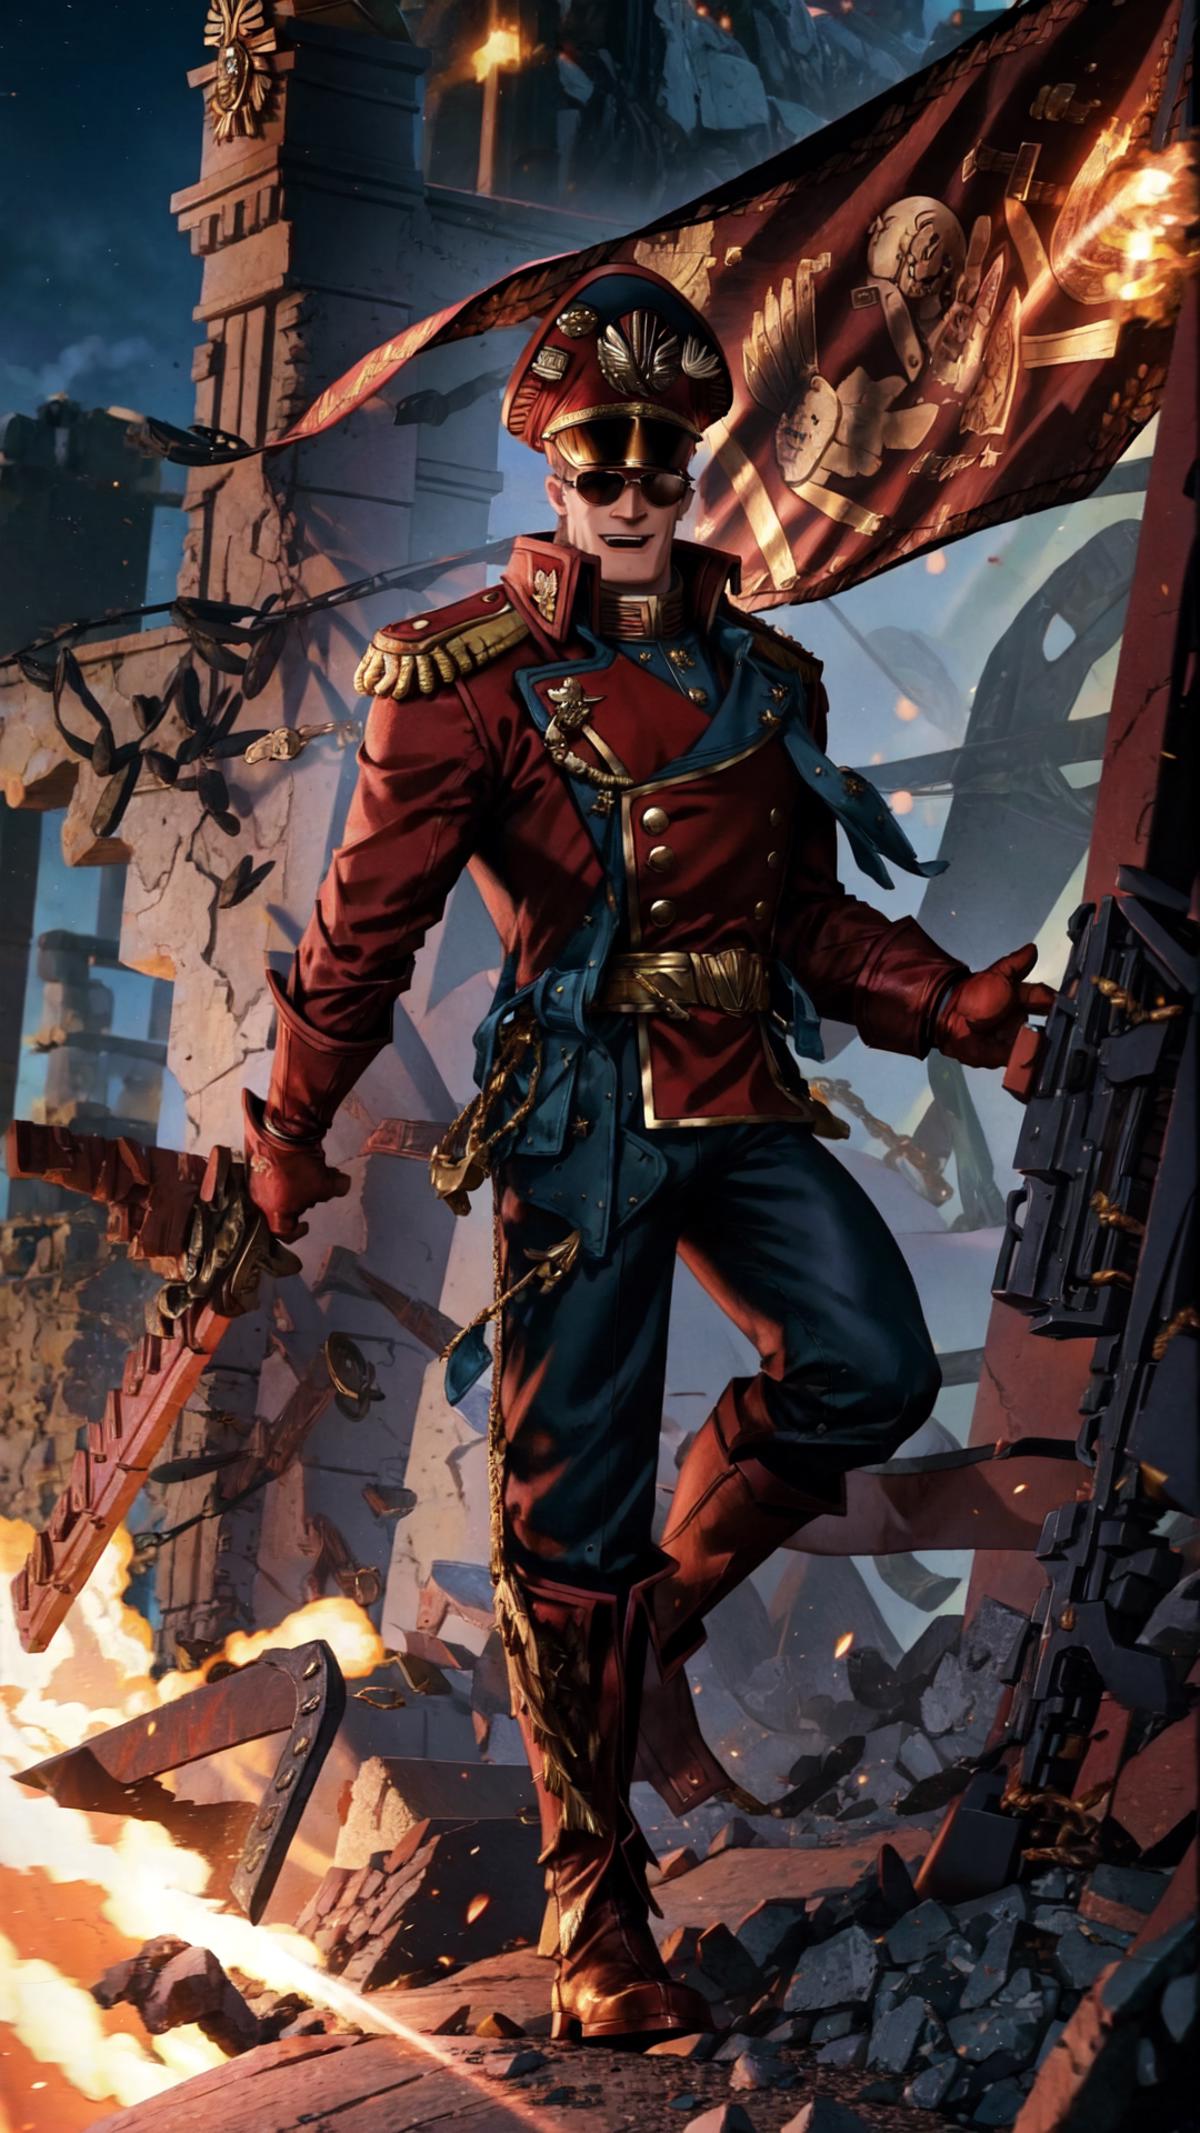 Commissar image by HC94